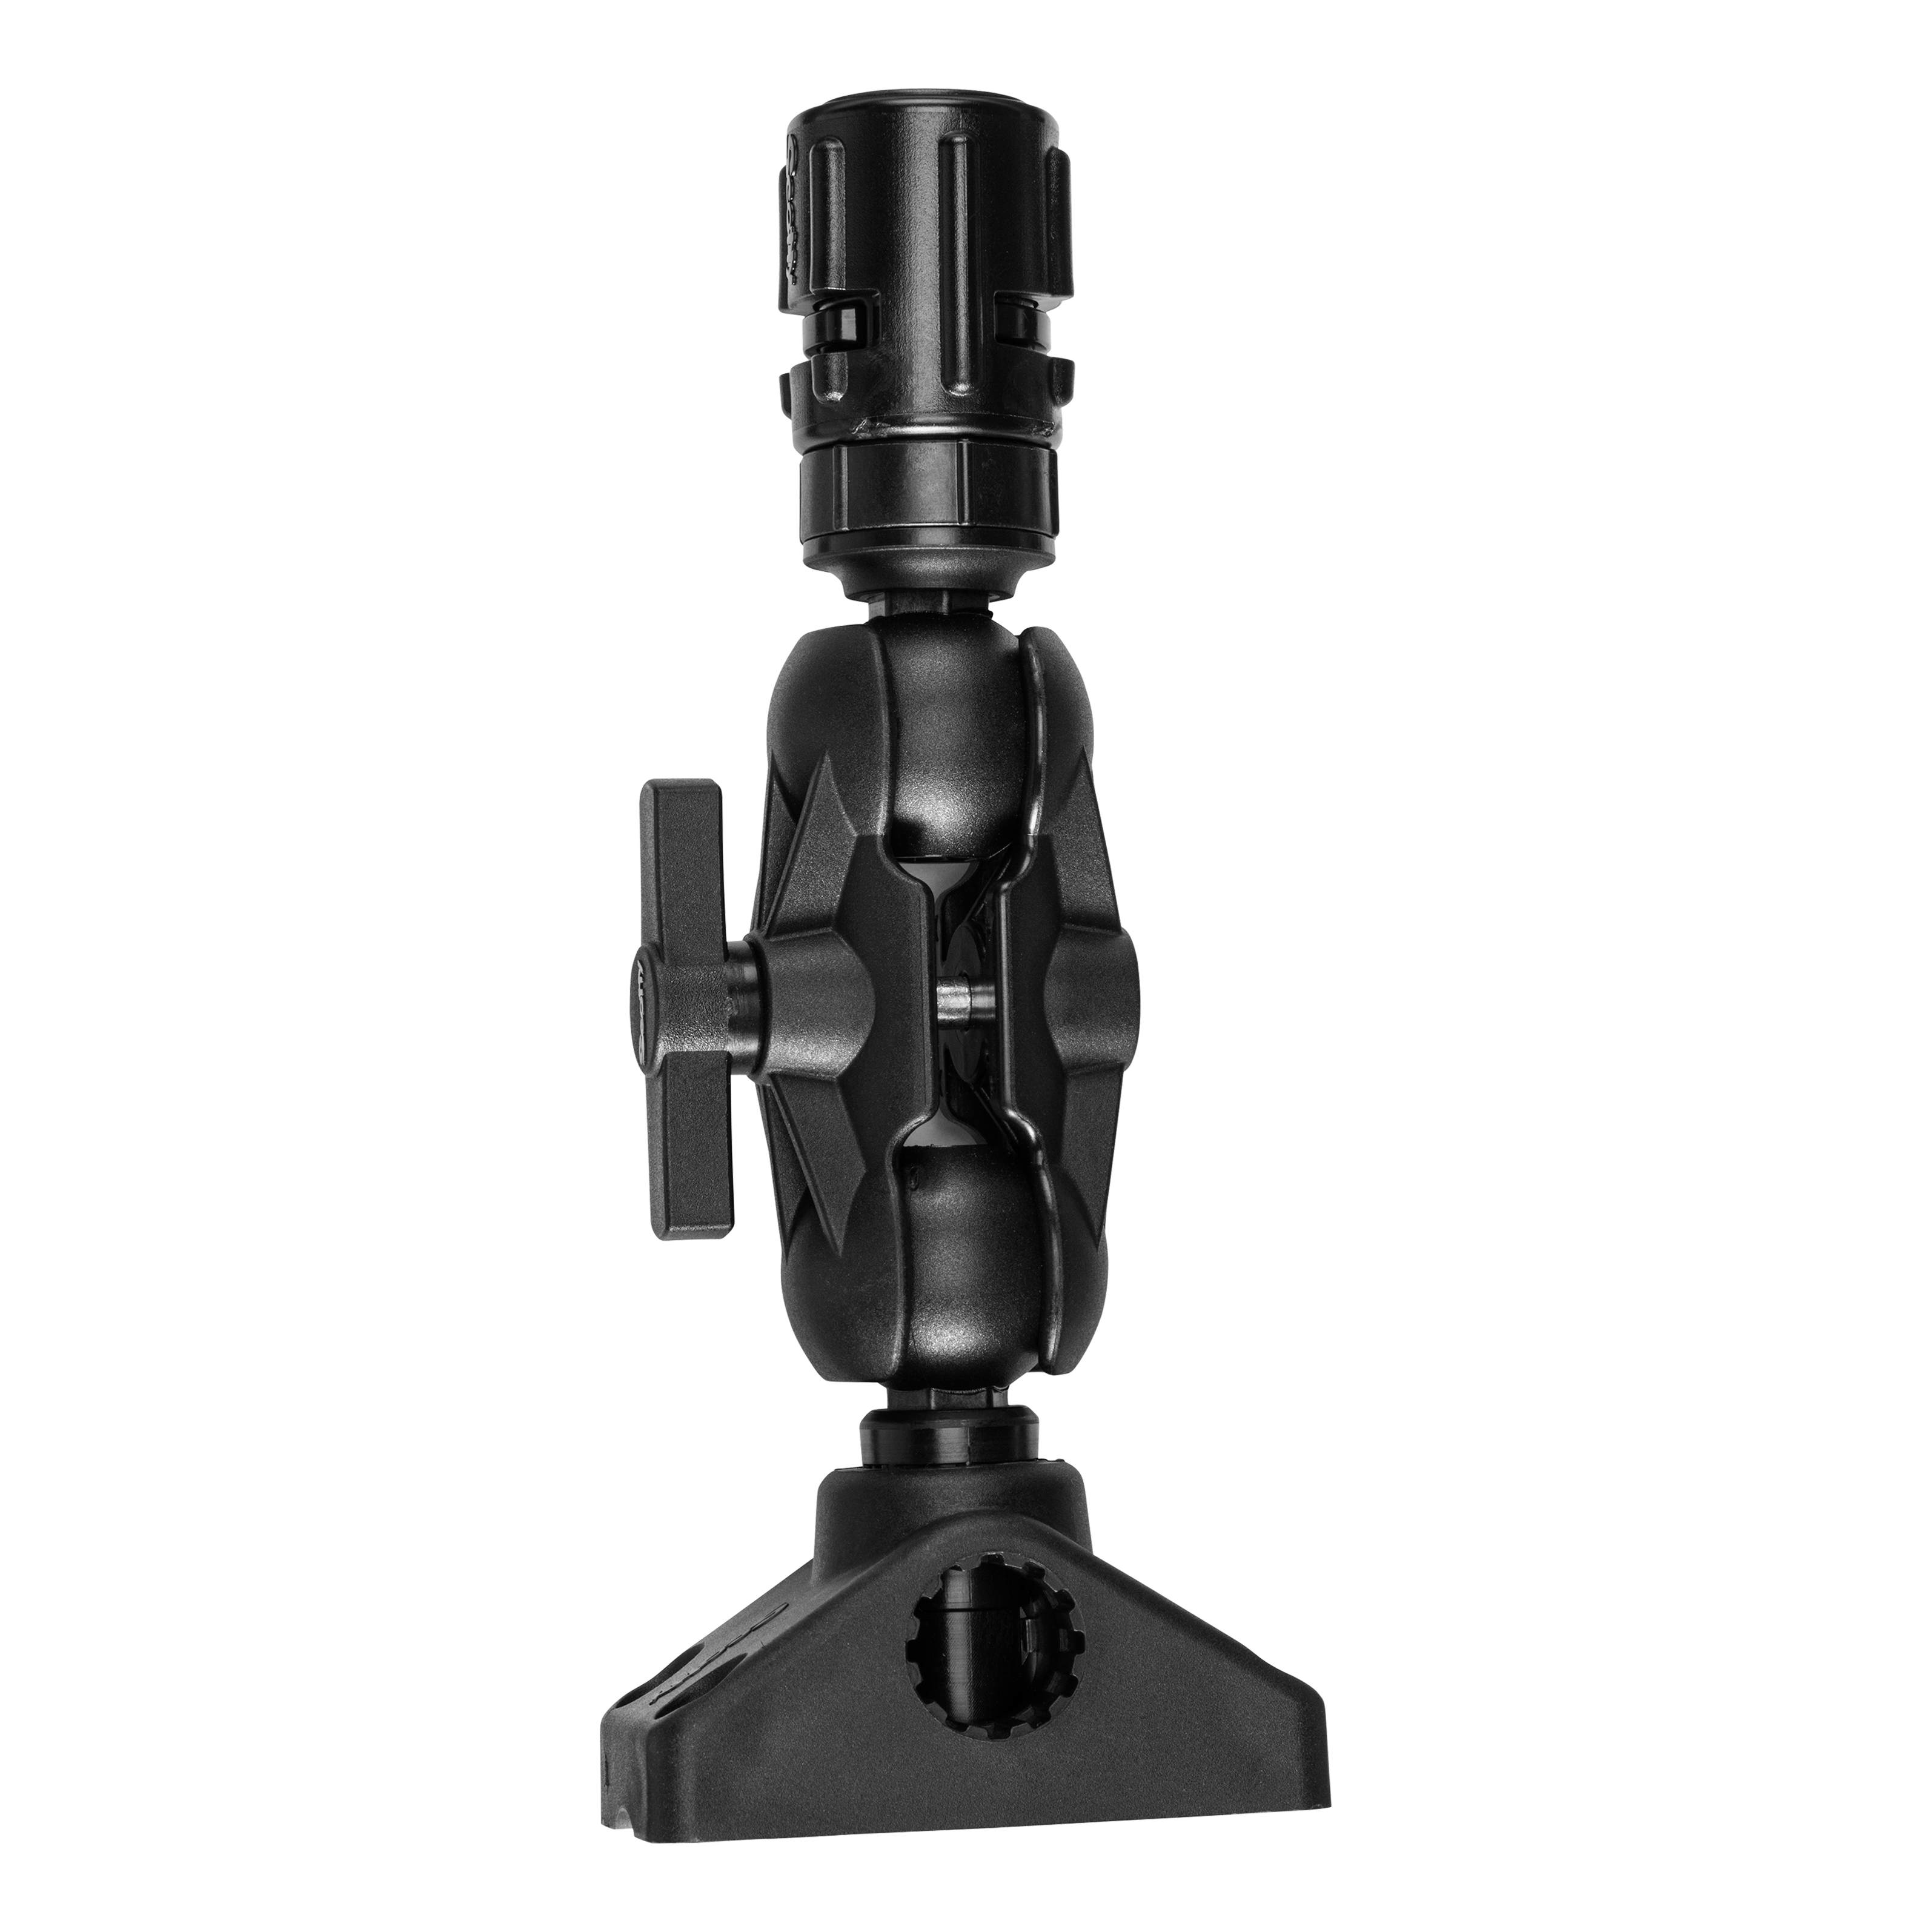 Scotty 1.5" Ball Mount with Gear Head Post and Side Deck Mount